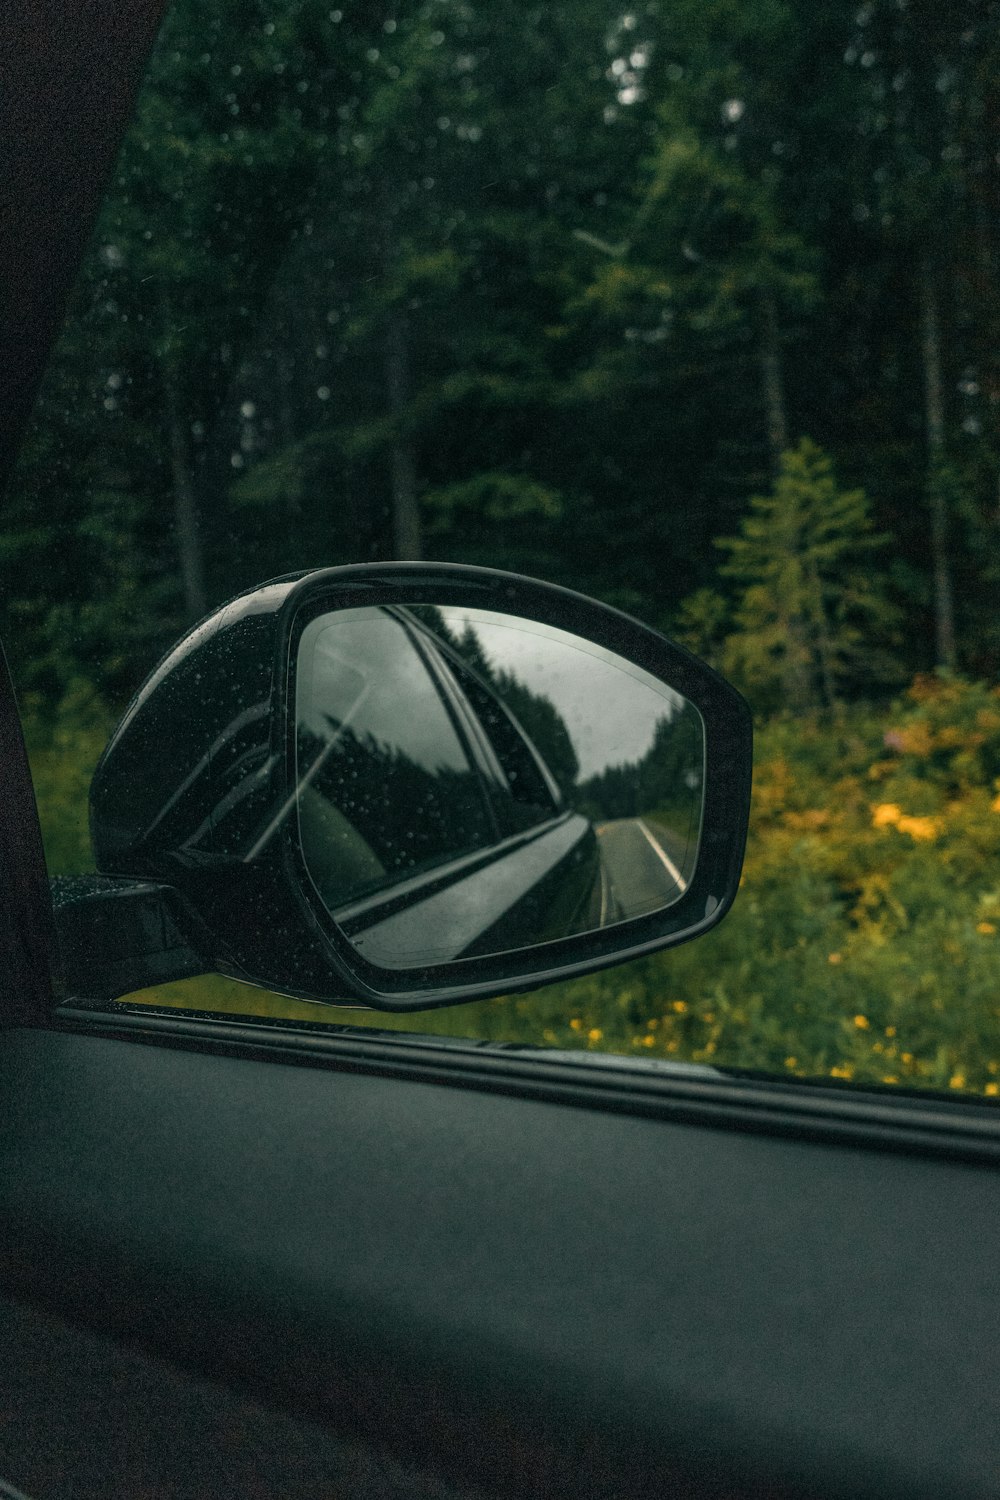 car side mirror reflecting green trees during daytime